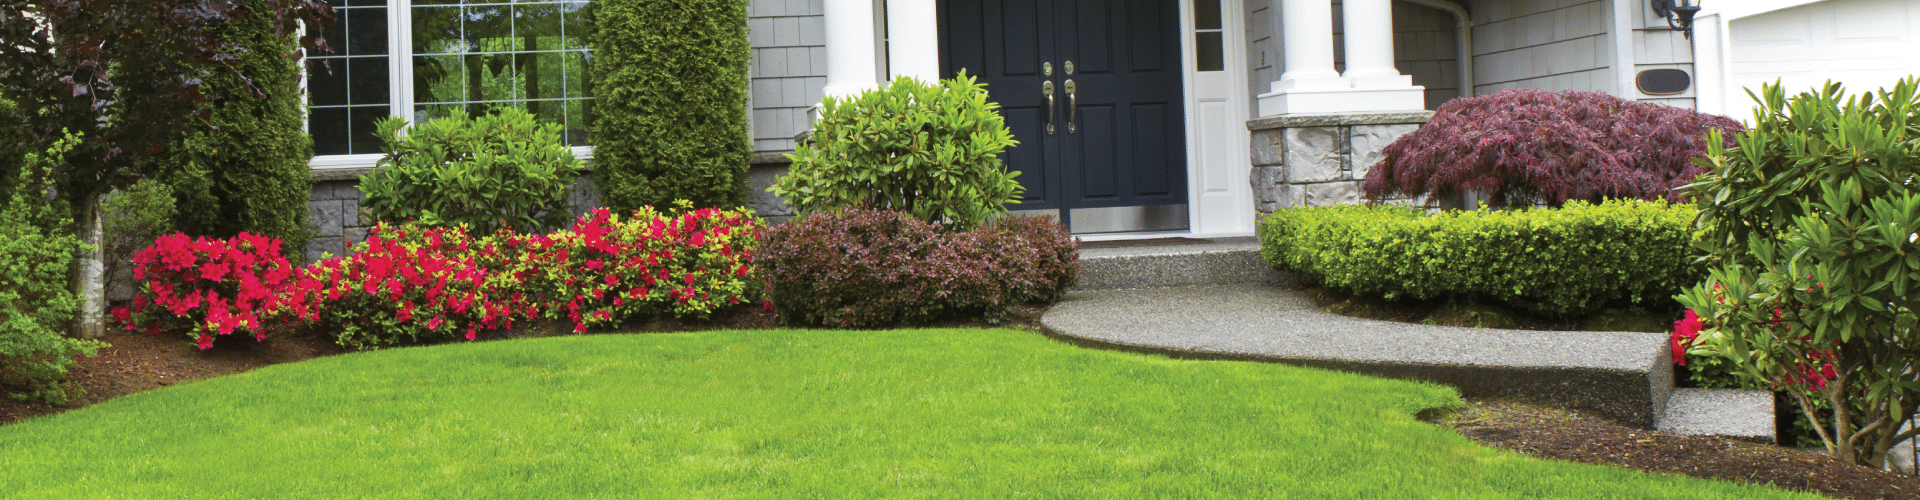 Best Shrubs For Small Areas In Your Landscape